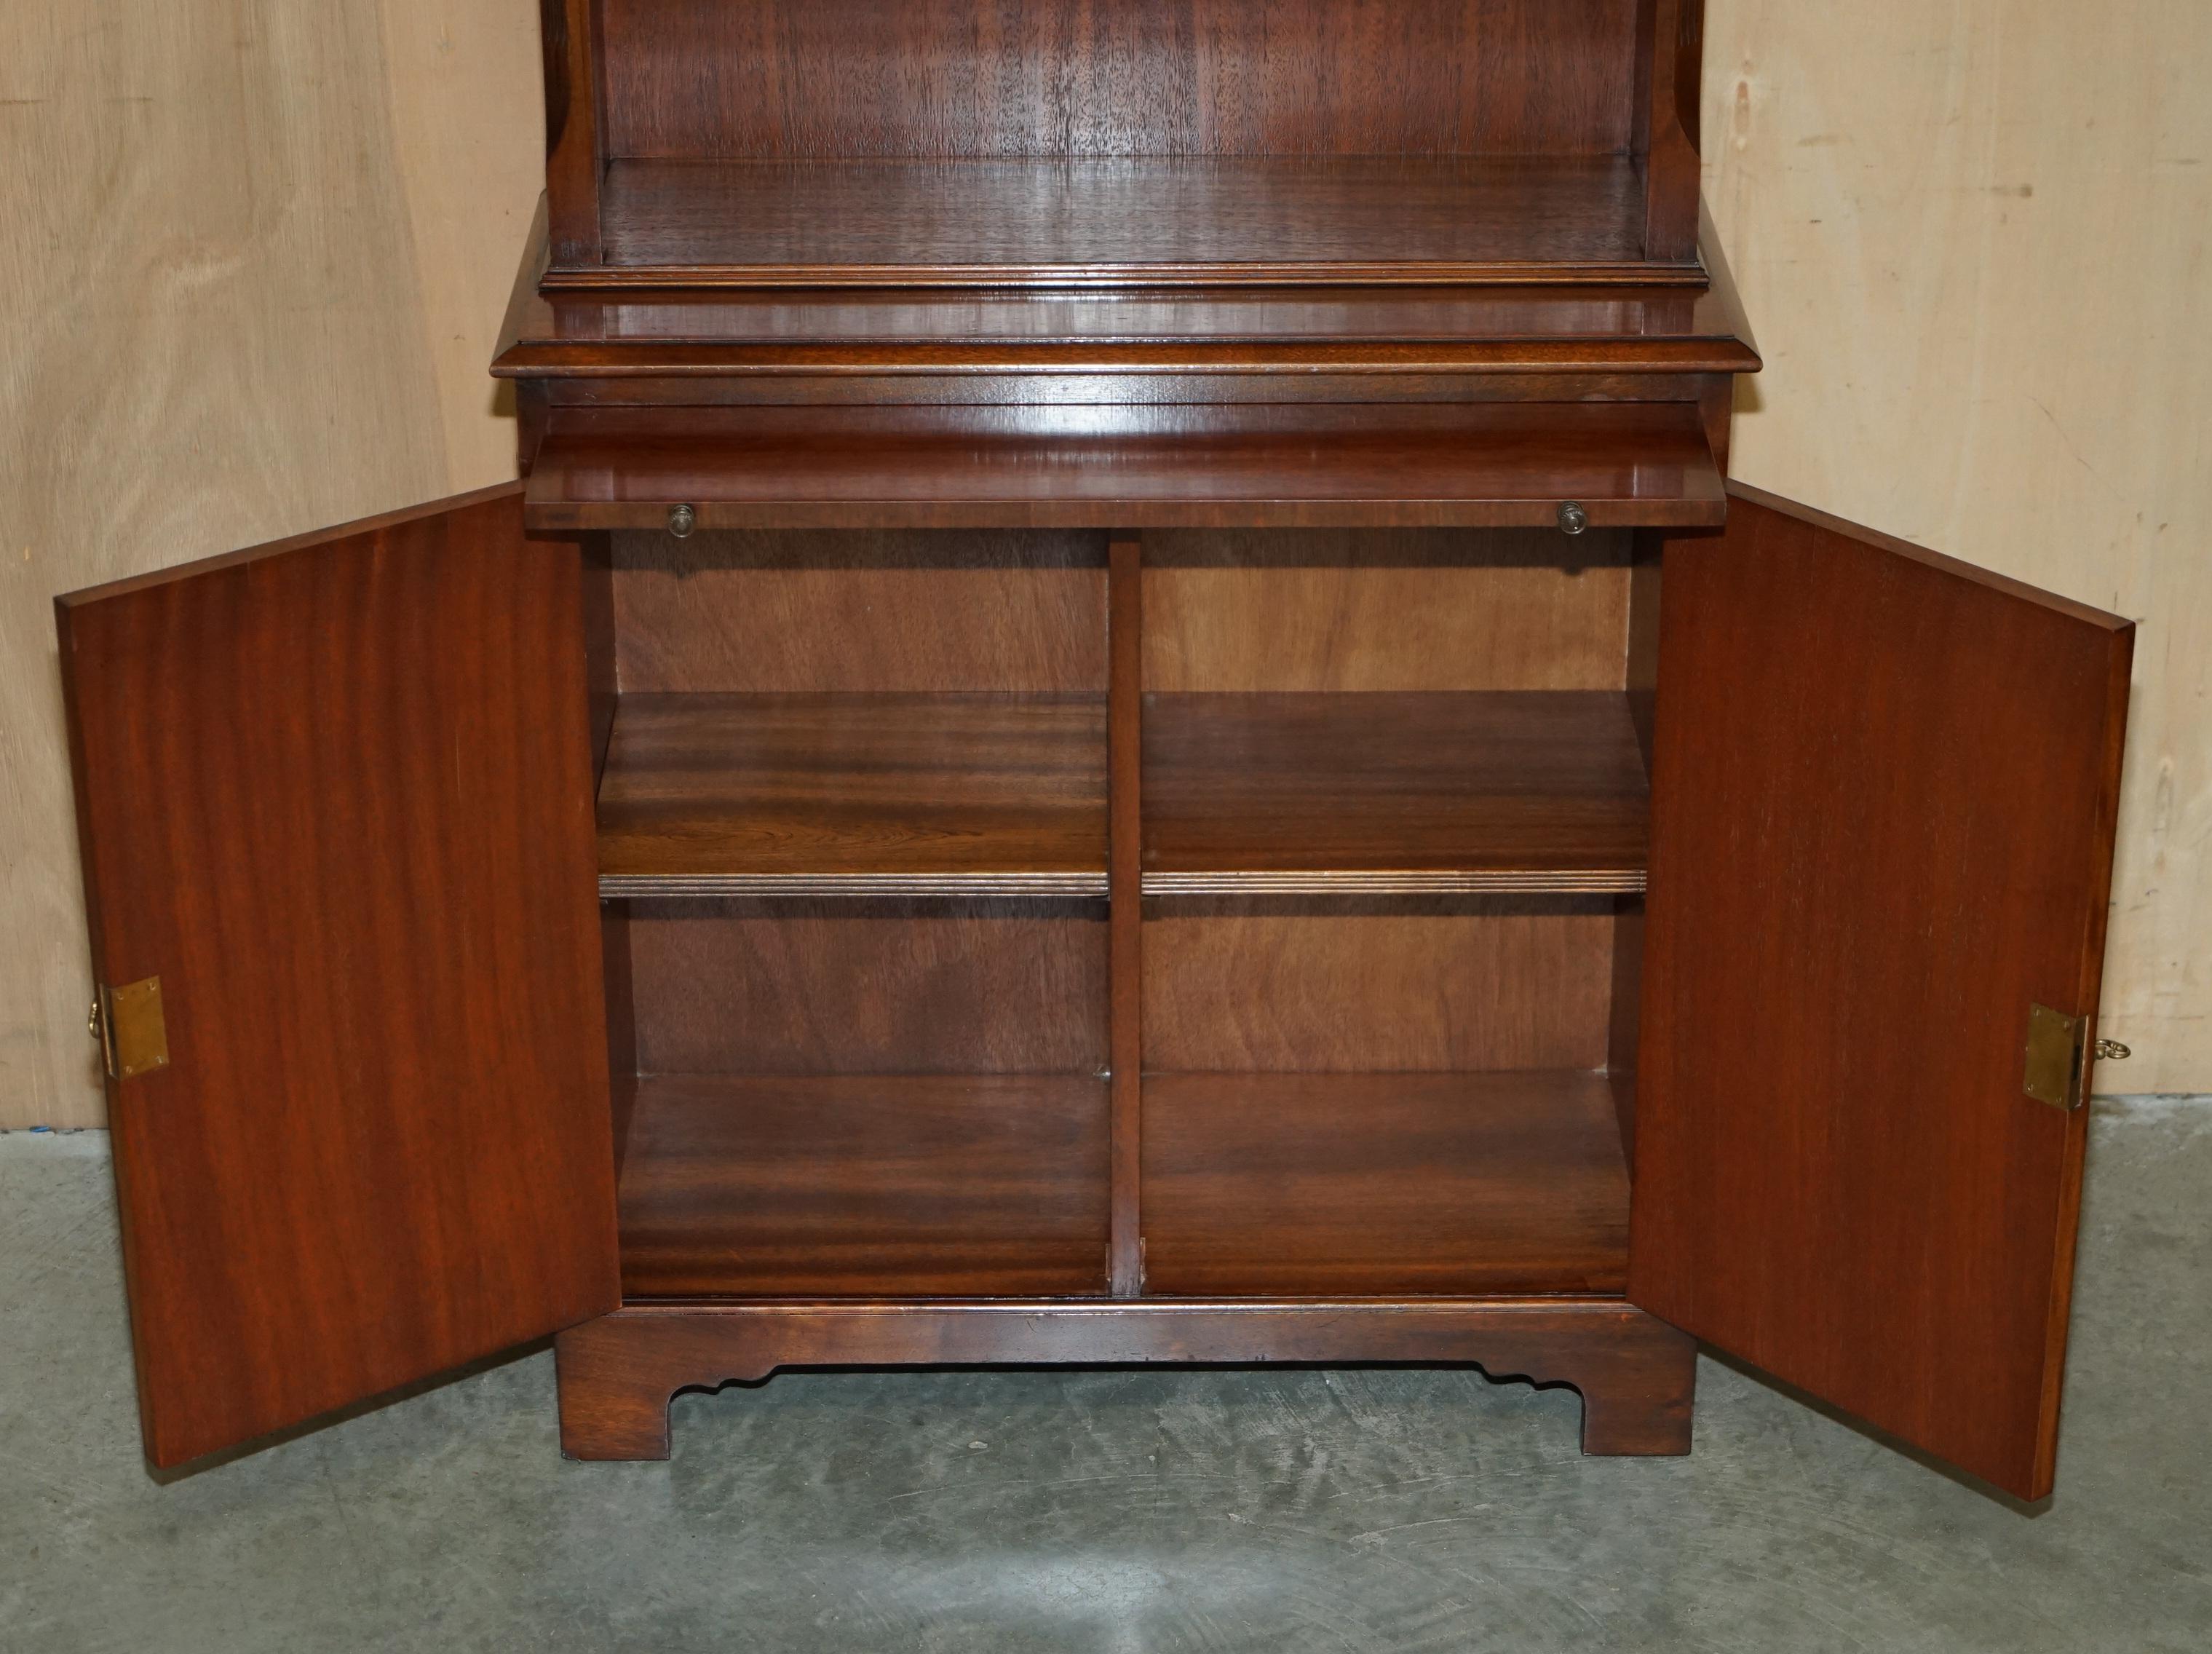 EXQUISITE PAIR OF FLAMED HARDWOOD LIBRARY BOOKCASES SLIP DRiNKS SERVING SHELVES For Sale 11